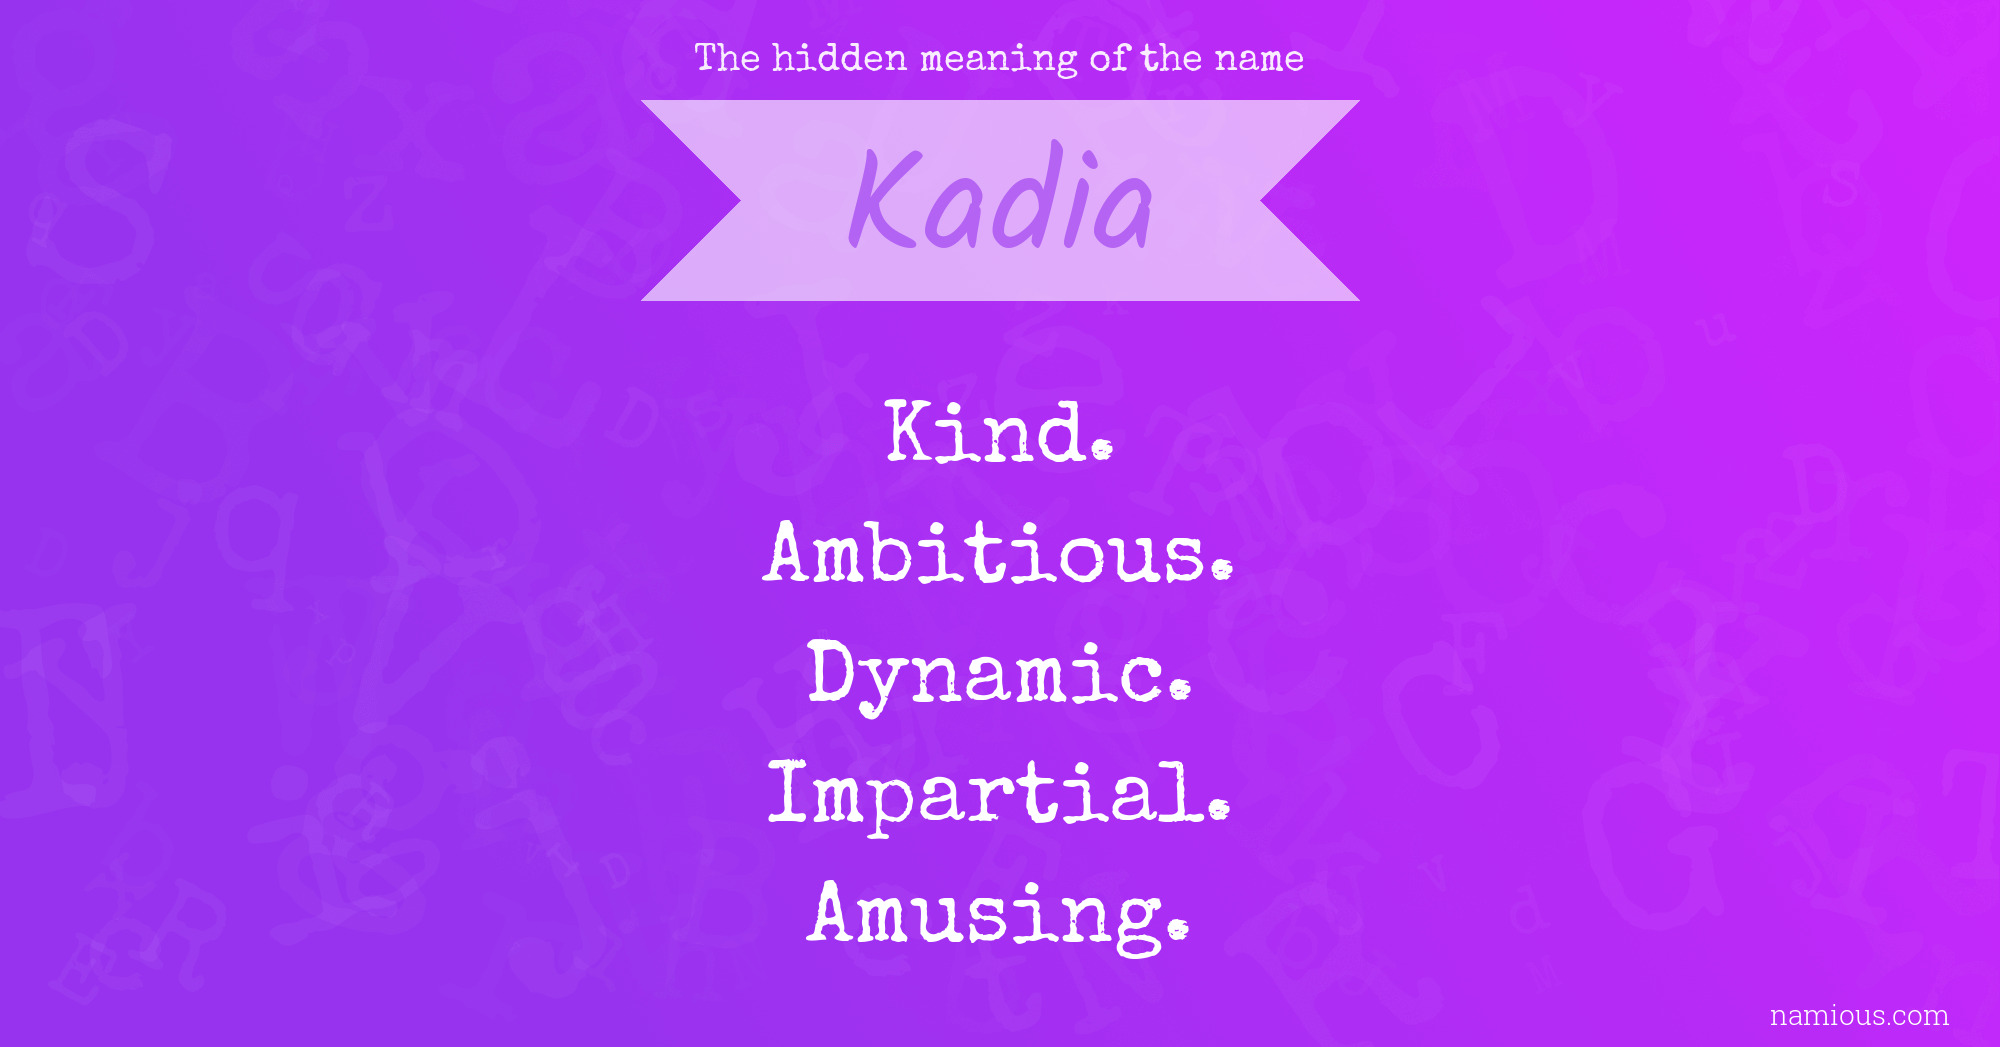 The hidden meaning of the name Kadia